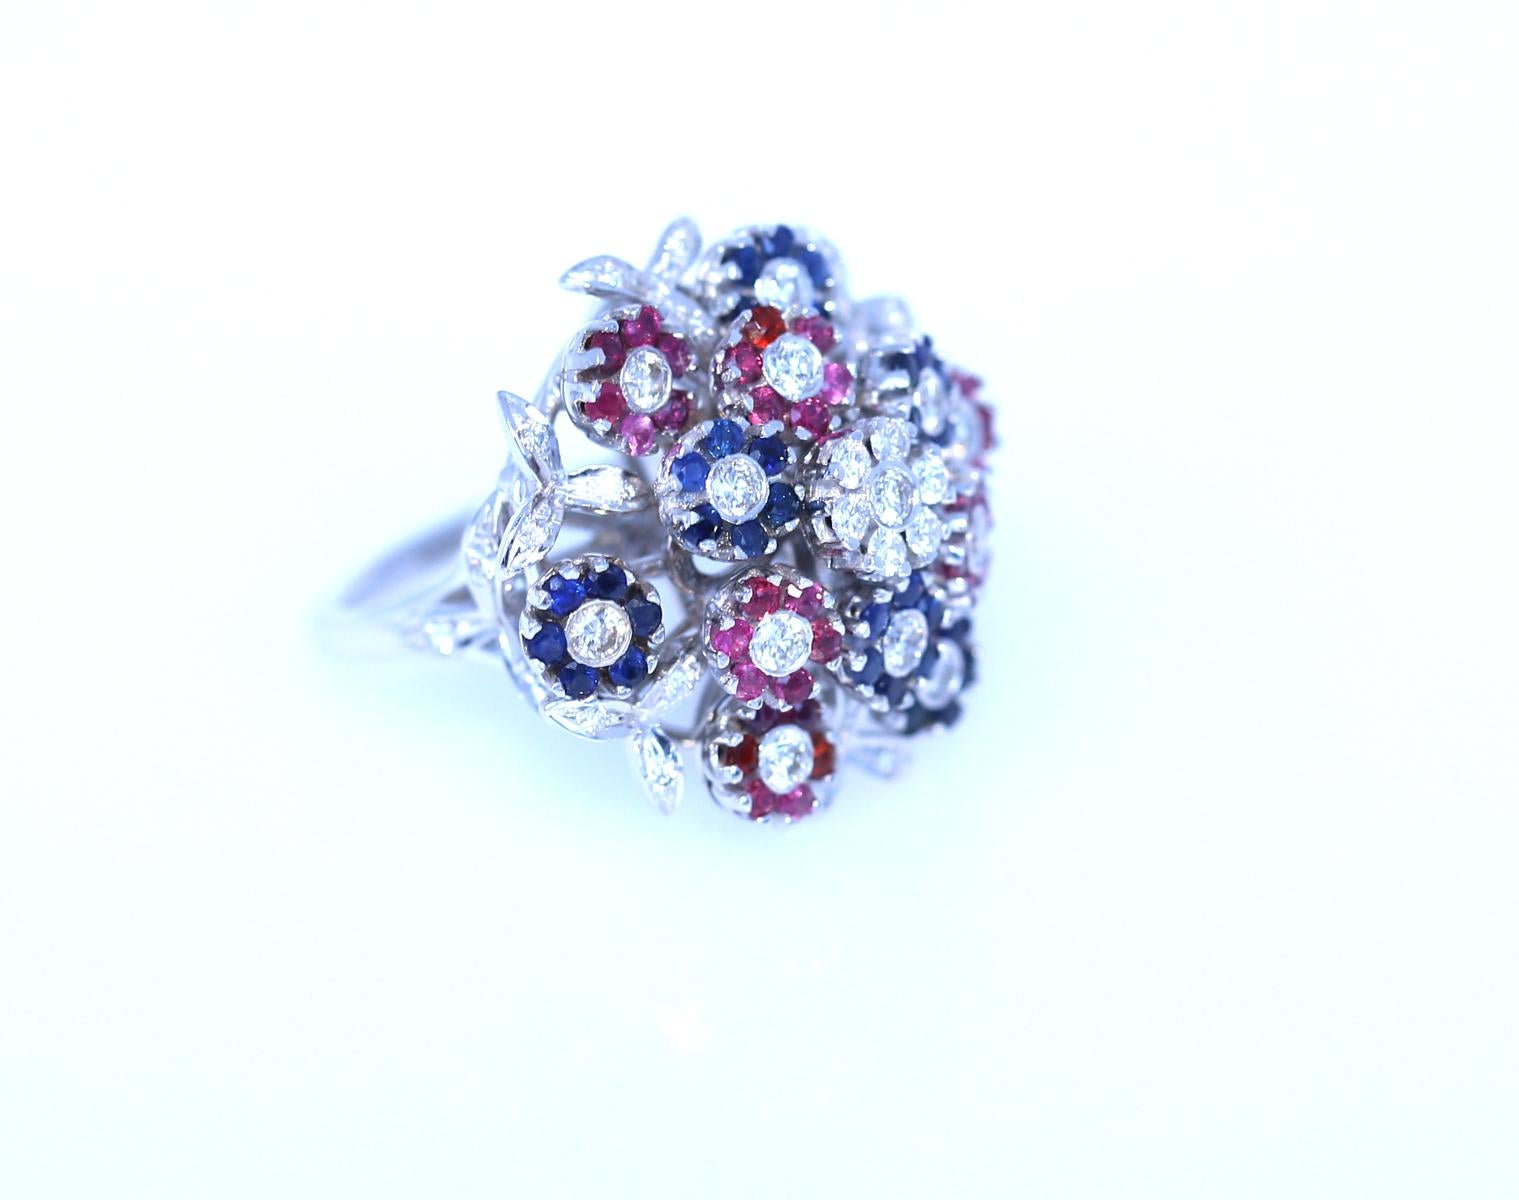 Diamonds, Sapphire and Rubies Ring depicting a Bouquet Moving Flowers. Produced in 2010. 
A ring with a bouquet of moving flowers Diamonds Sapphire Rubies. Amazing craftsmanship of the jeweler. The ring is actually a fine flower bouquet where each